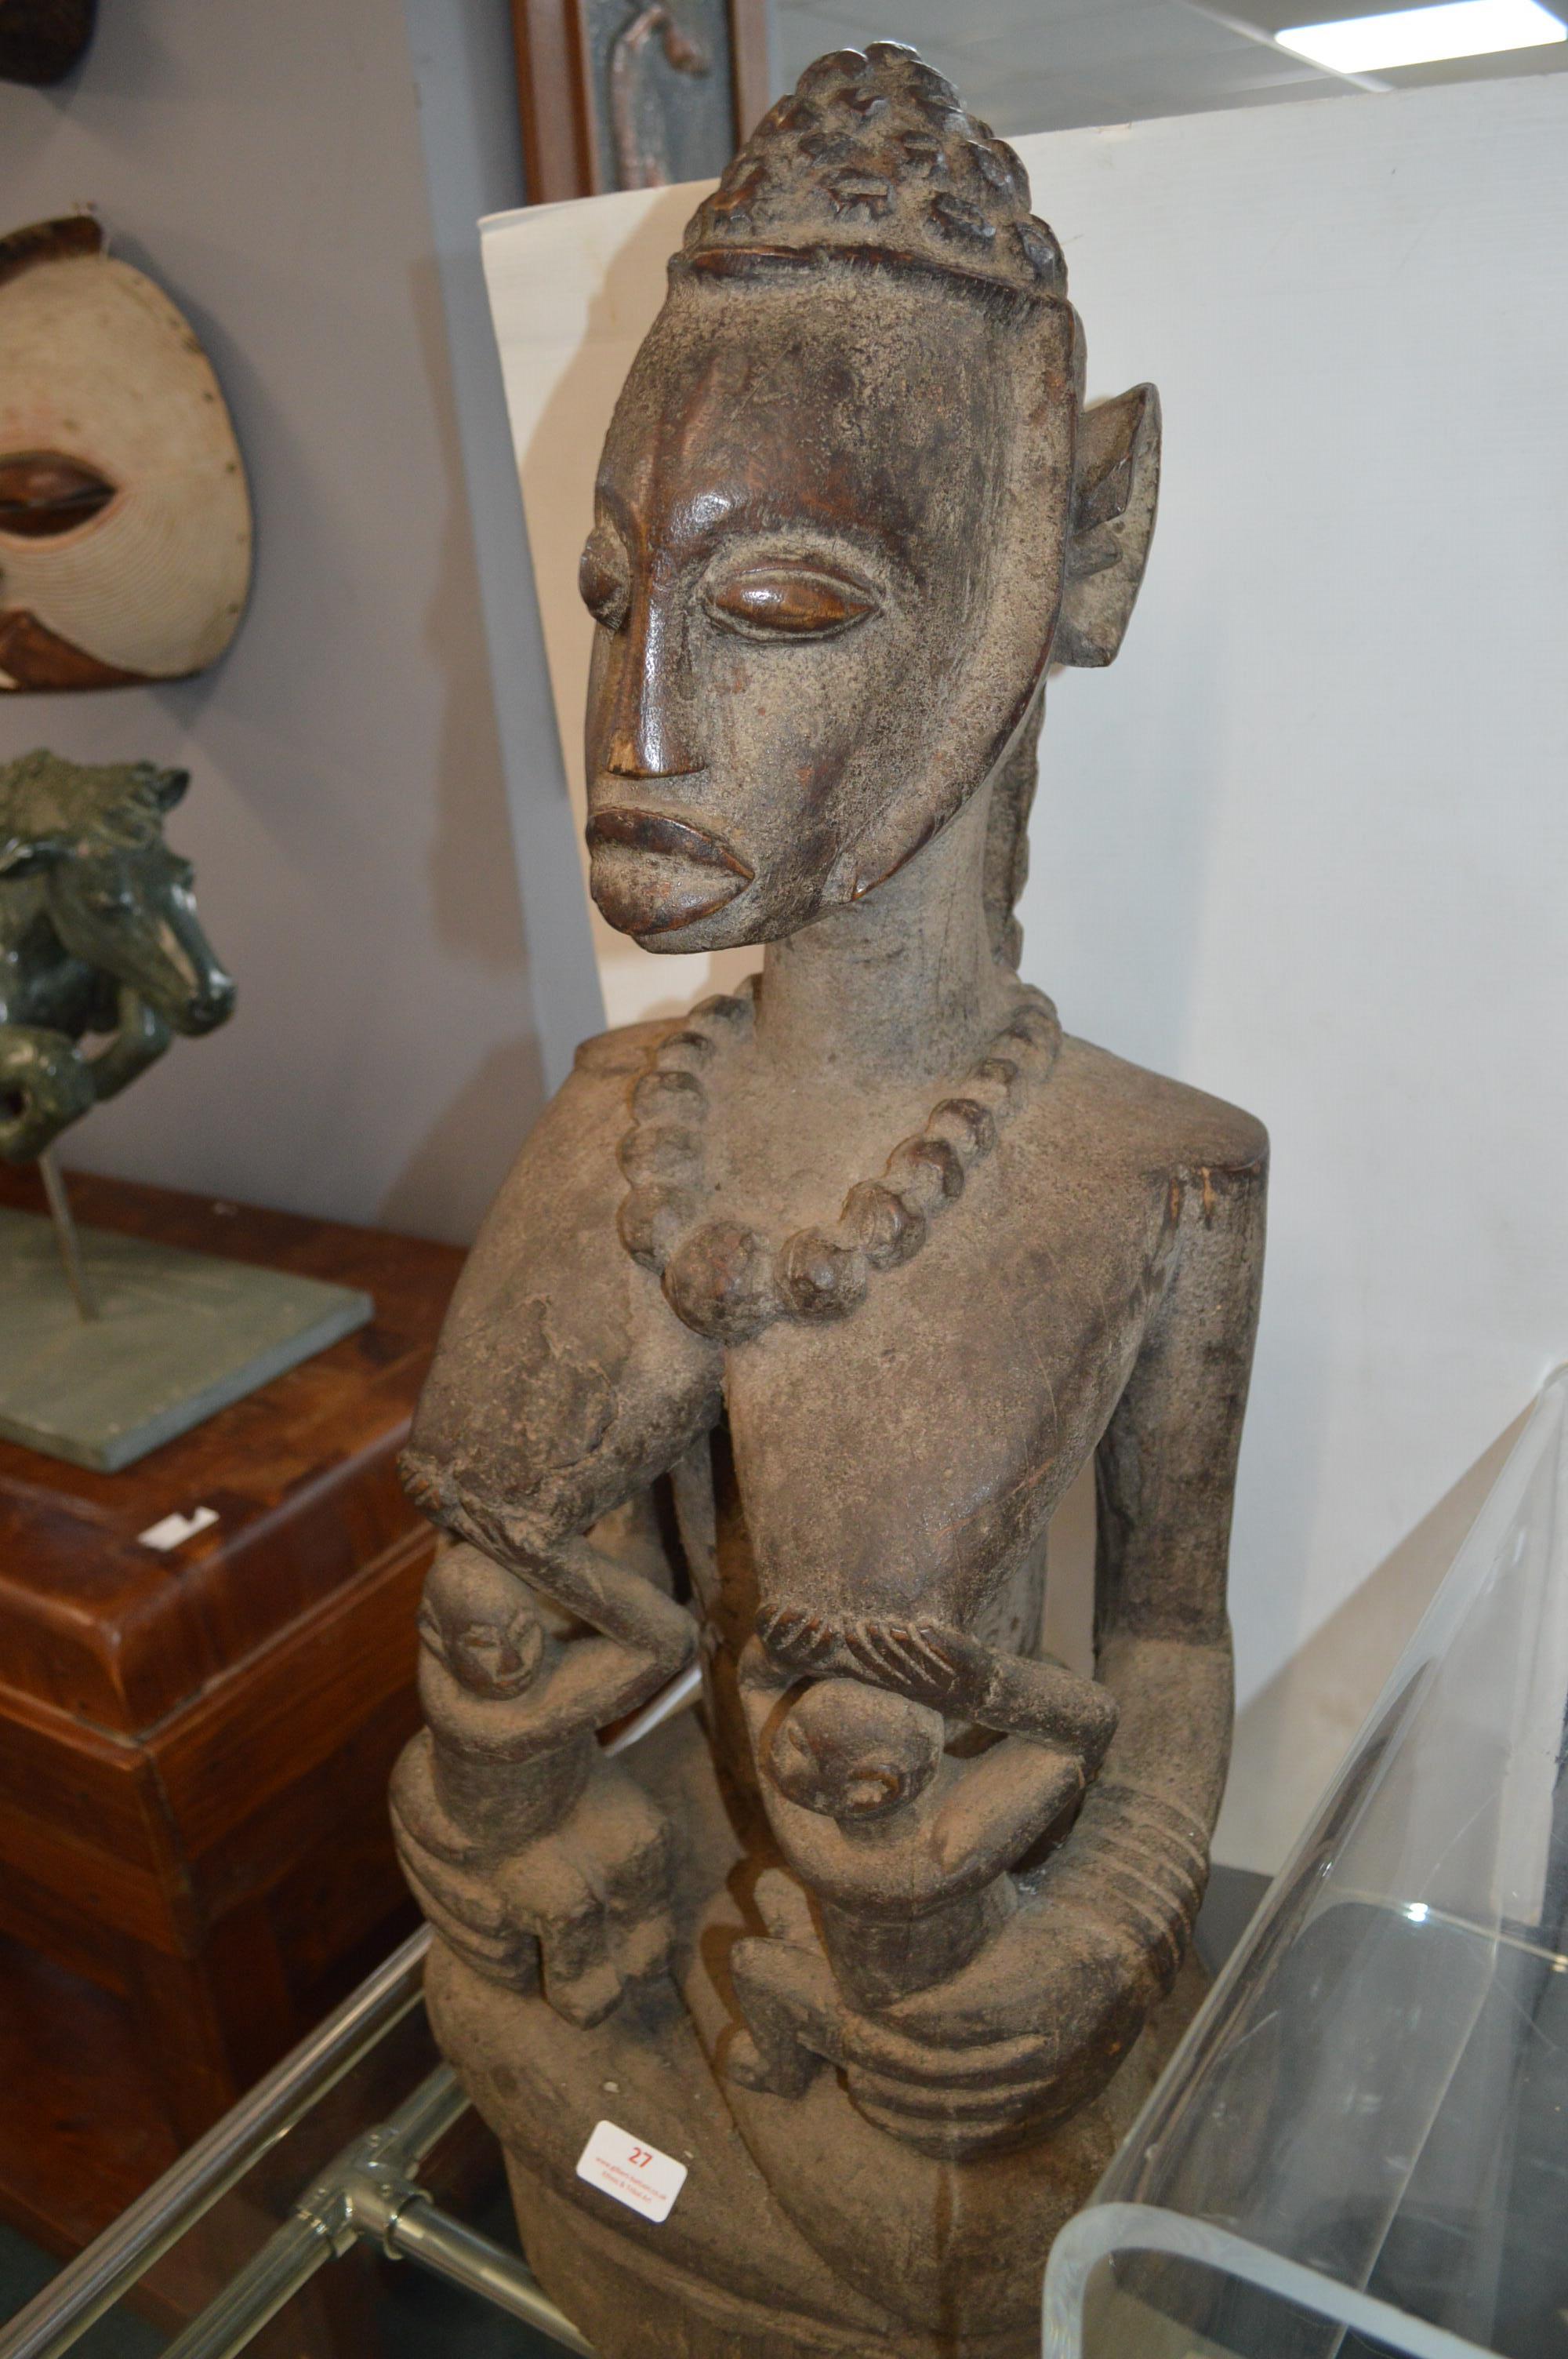 Large Carved Wooden African Fertility Figure 80cm tall - Image 3 of 3